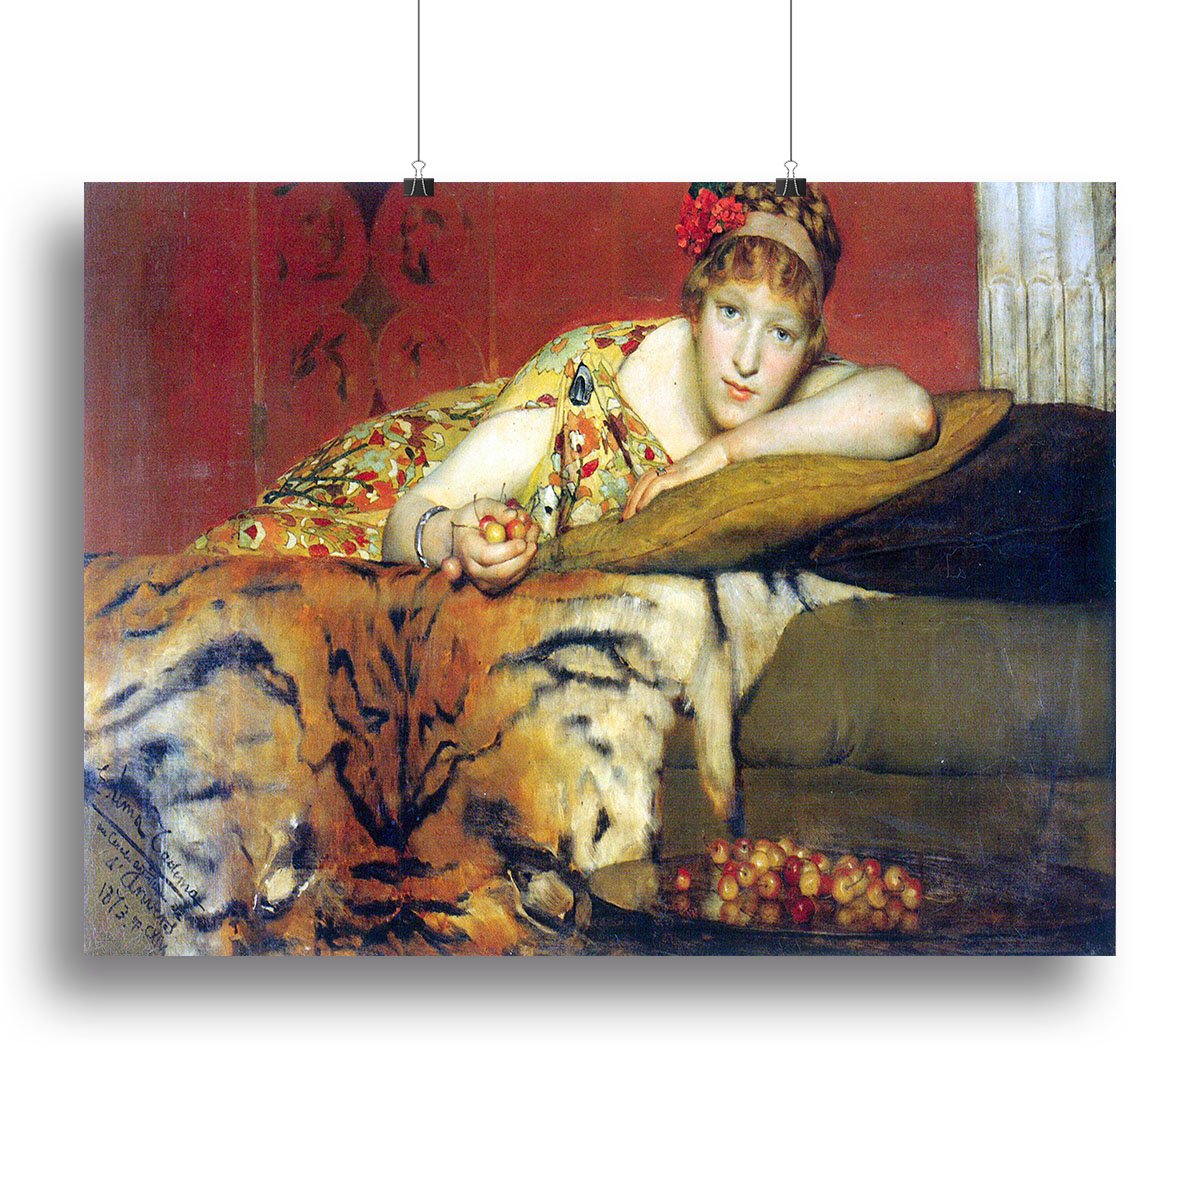 A craving for cherries by Alma Tadema Canvas Print or Poster